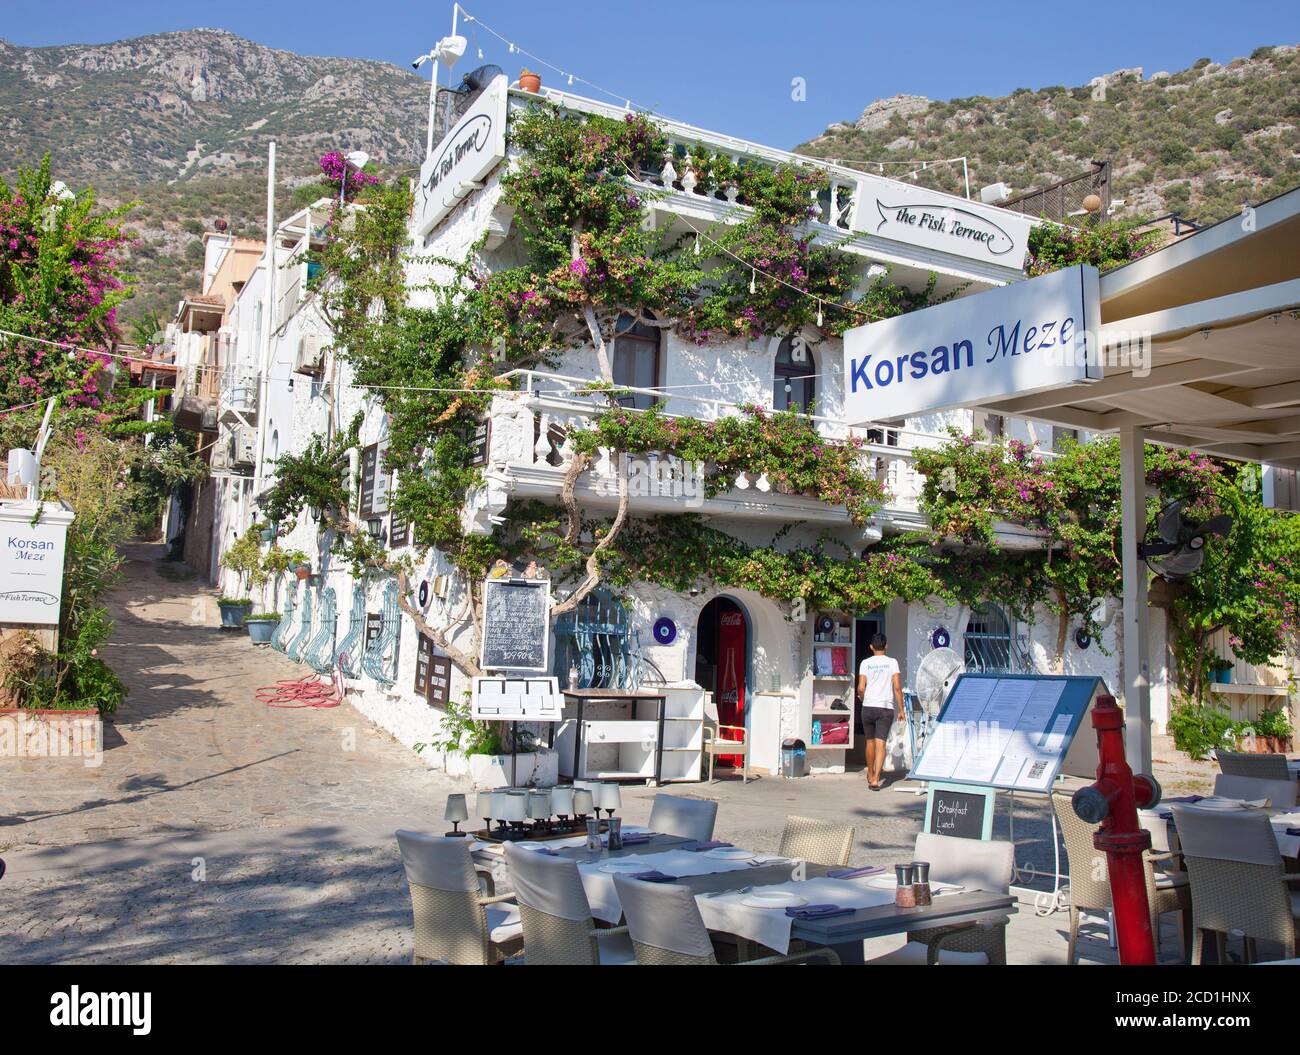 The Fish Terrace and the Korzan Meze resaurants in Kalkan, Turkey.  Kalkan is a popular holiday destination and is located on the Turkish Mediterranea Stock Photo